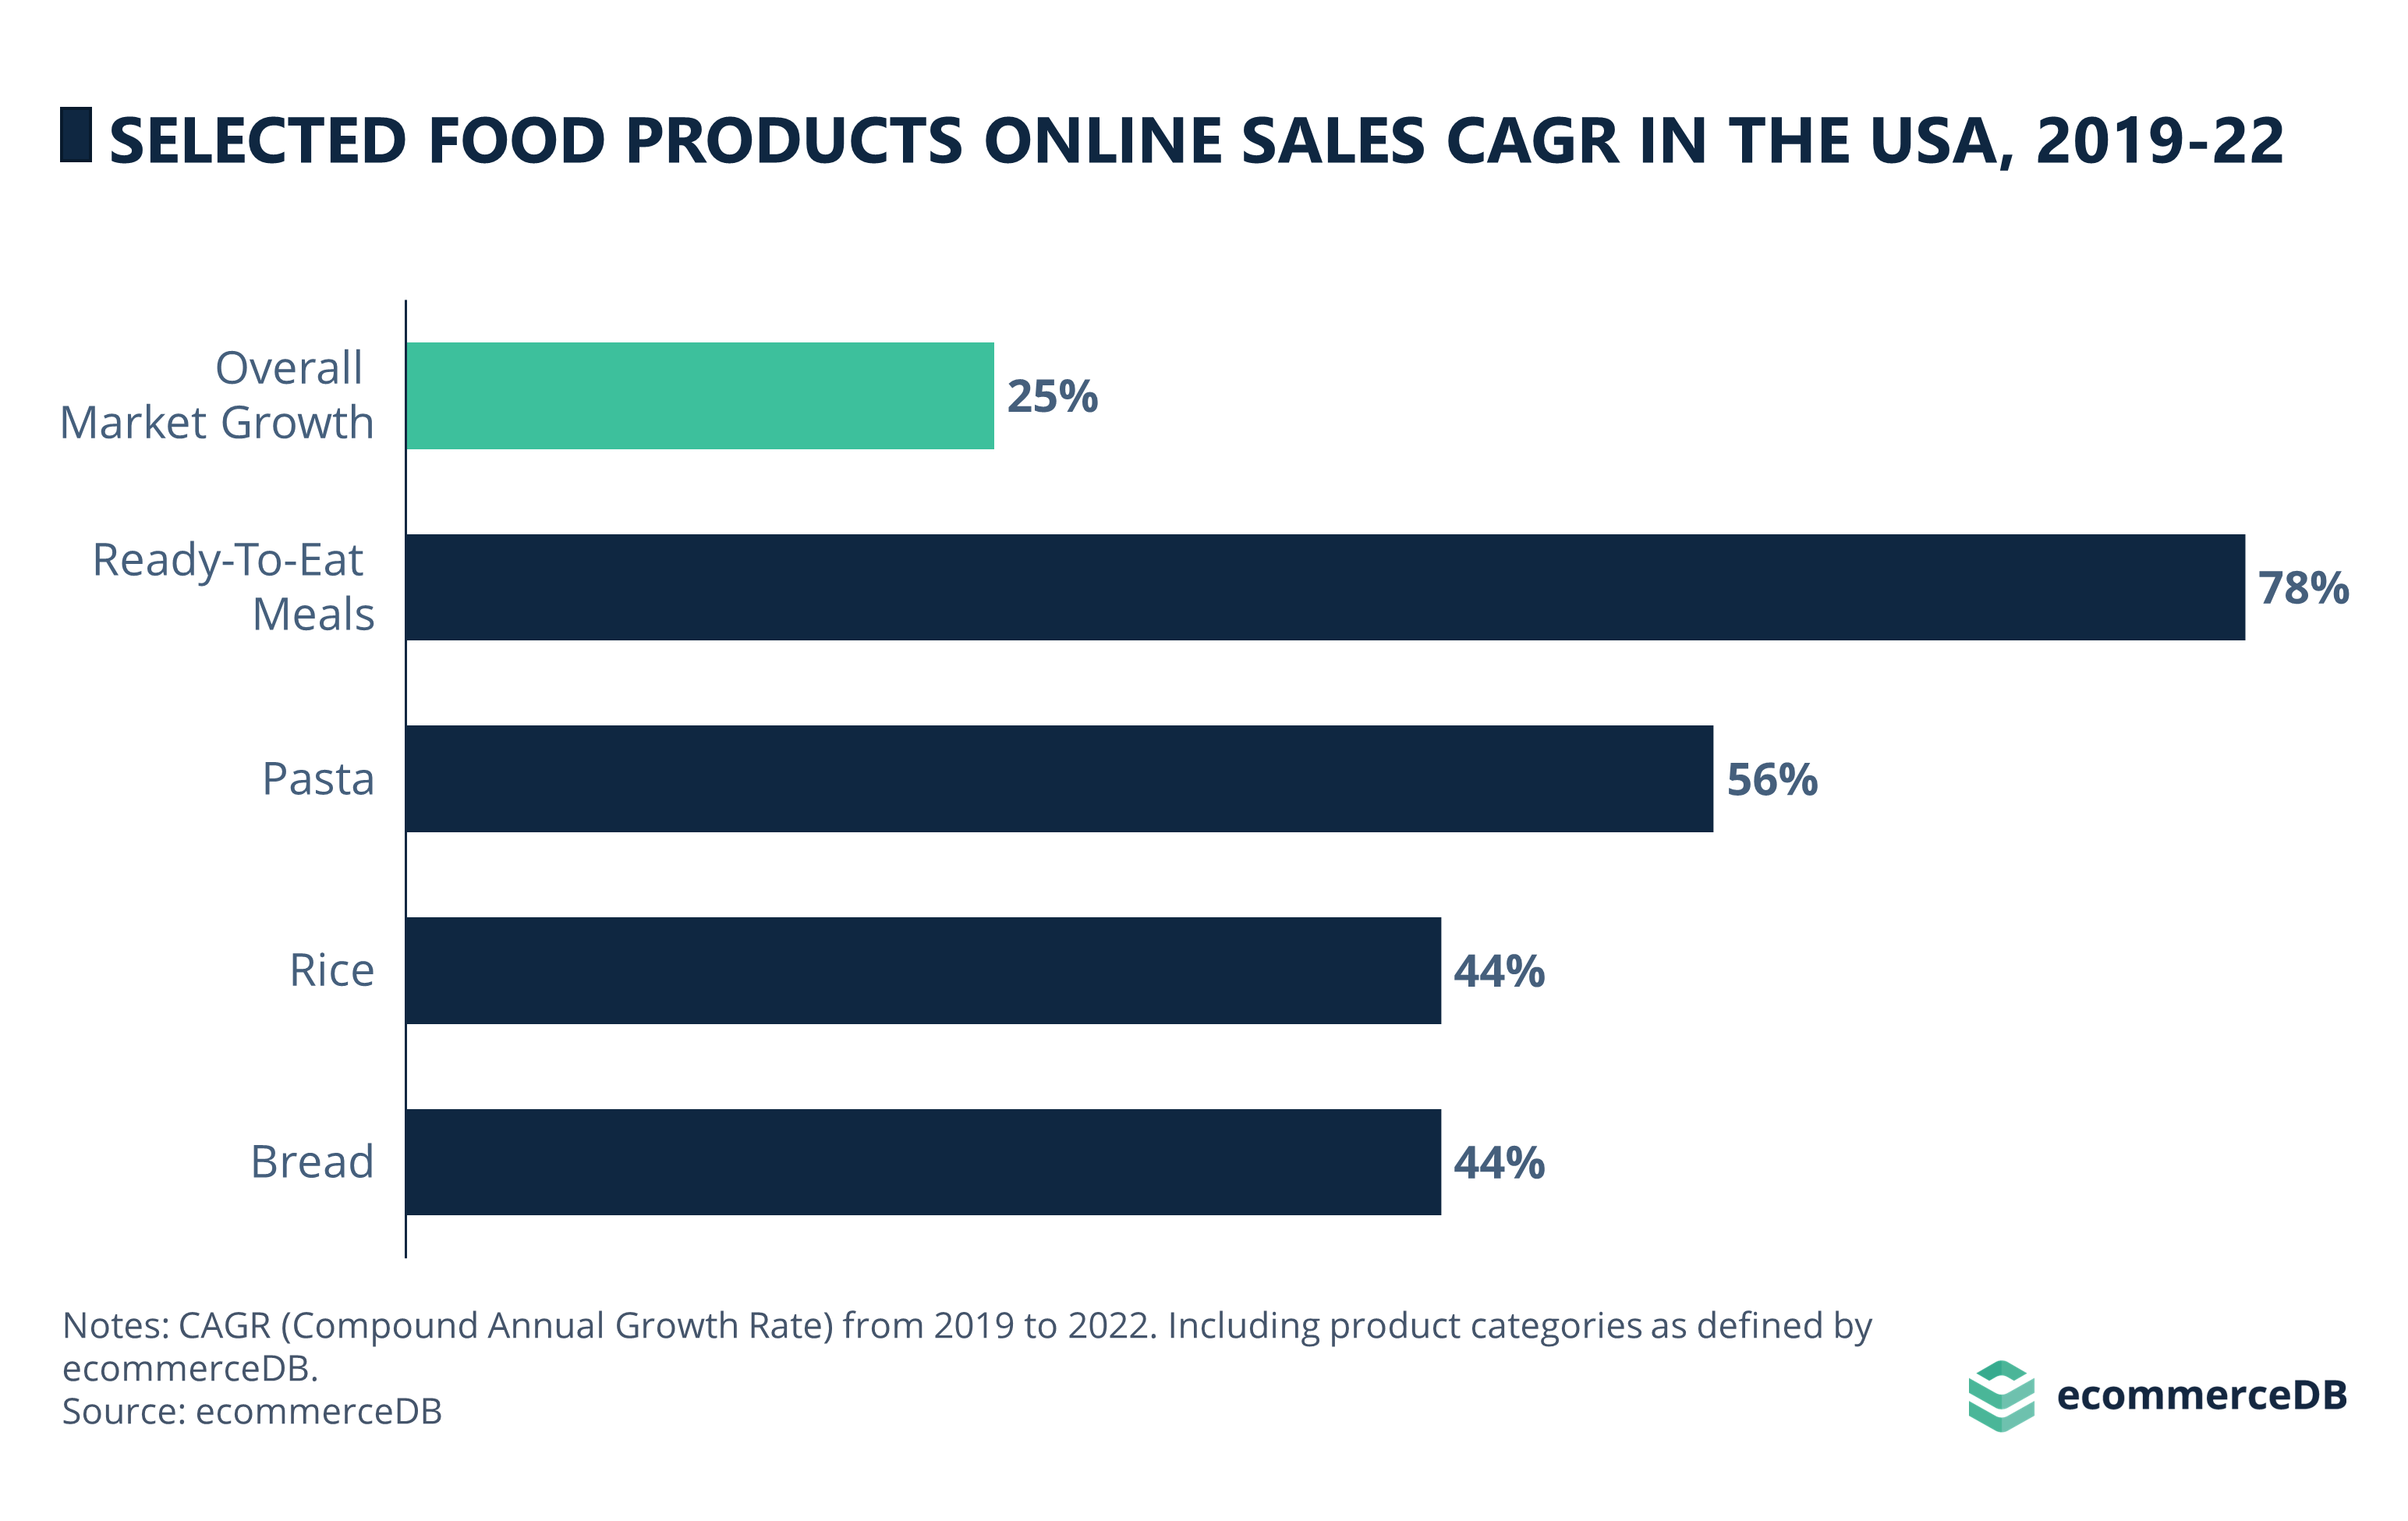 Convenience & Other Food Online Sales CAGR (2019-2022) in the U.S.